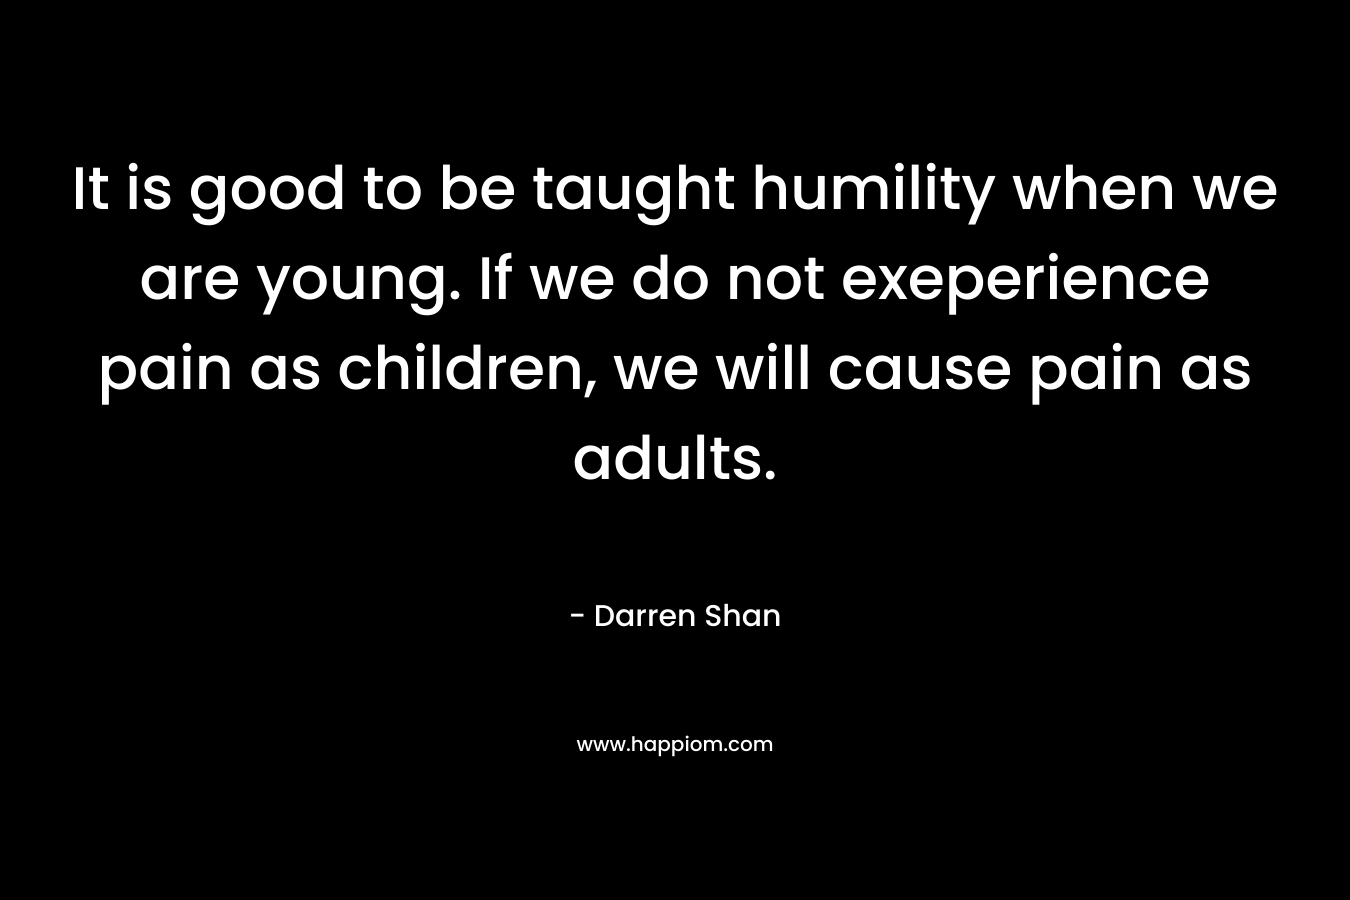 It is good to be taught humility when we are young. If we do not exeperience pain as children, we will cause pain as adults. – Darren Shan